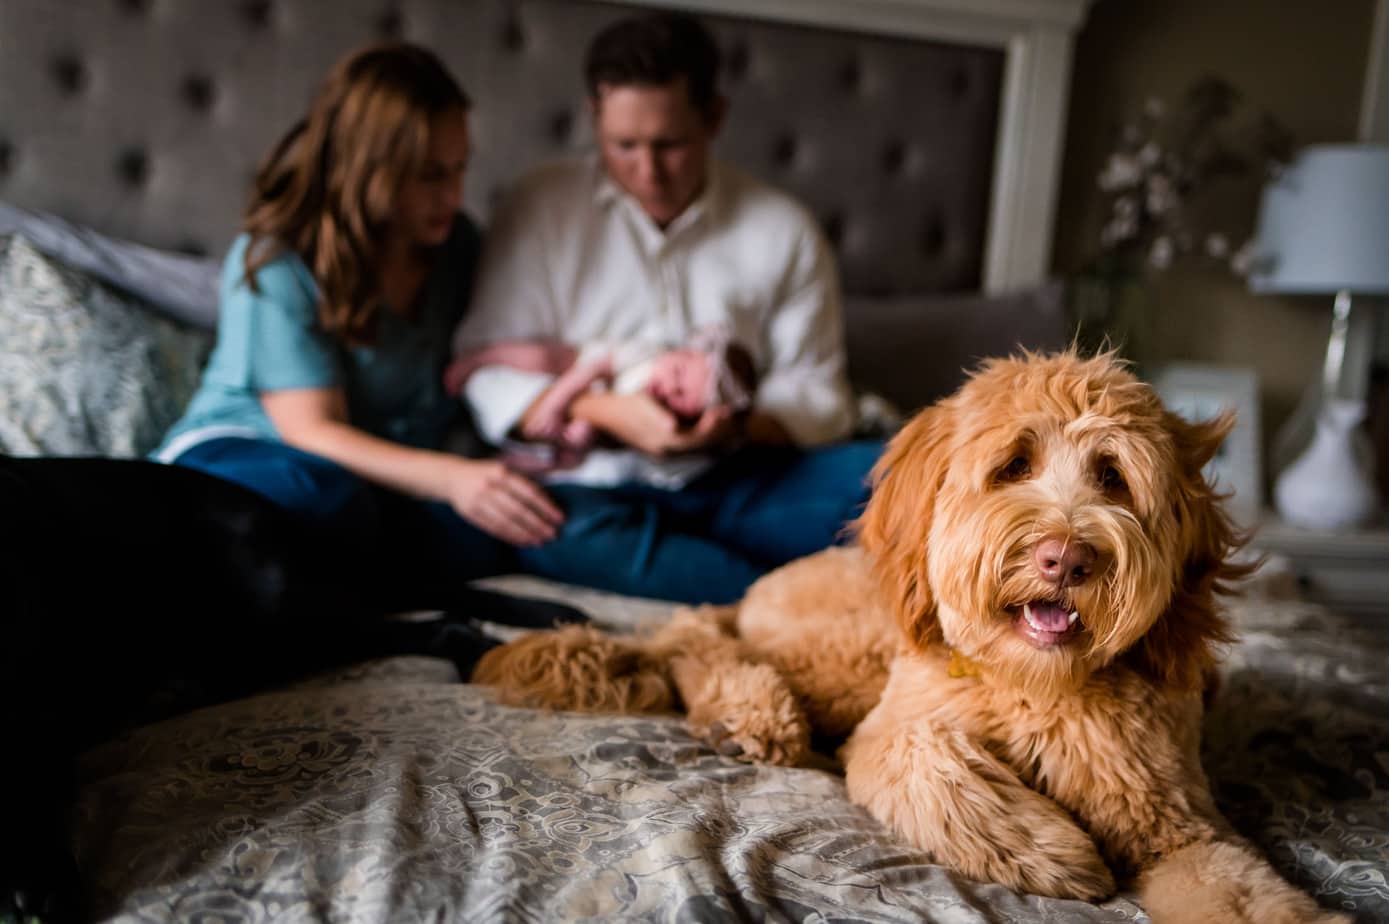 A dog on the bed with his brother, new sister and parents in their home.